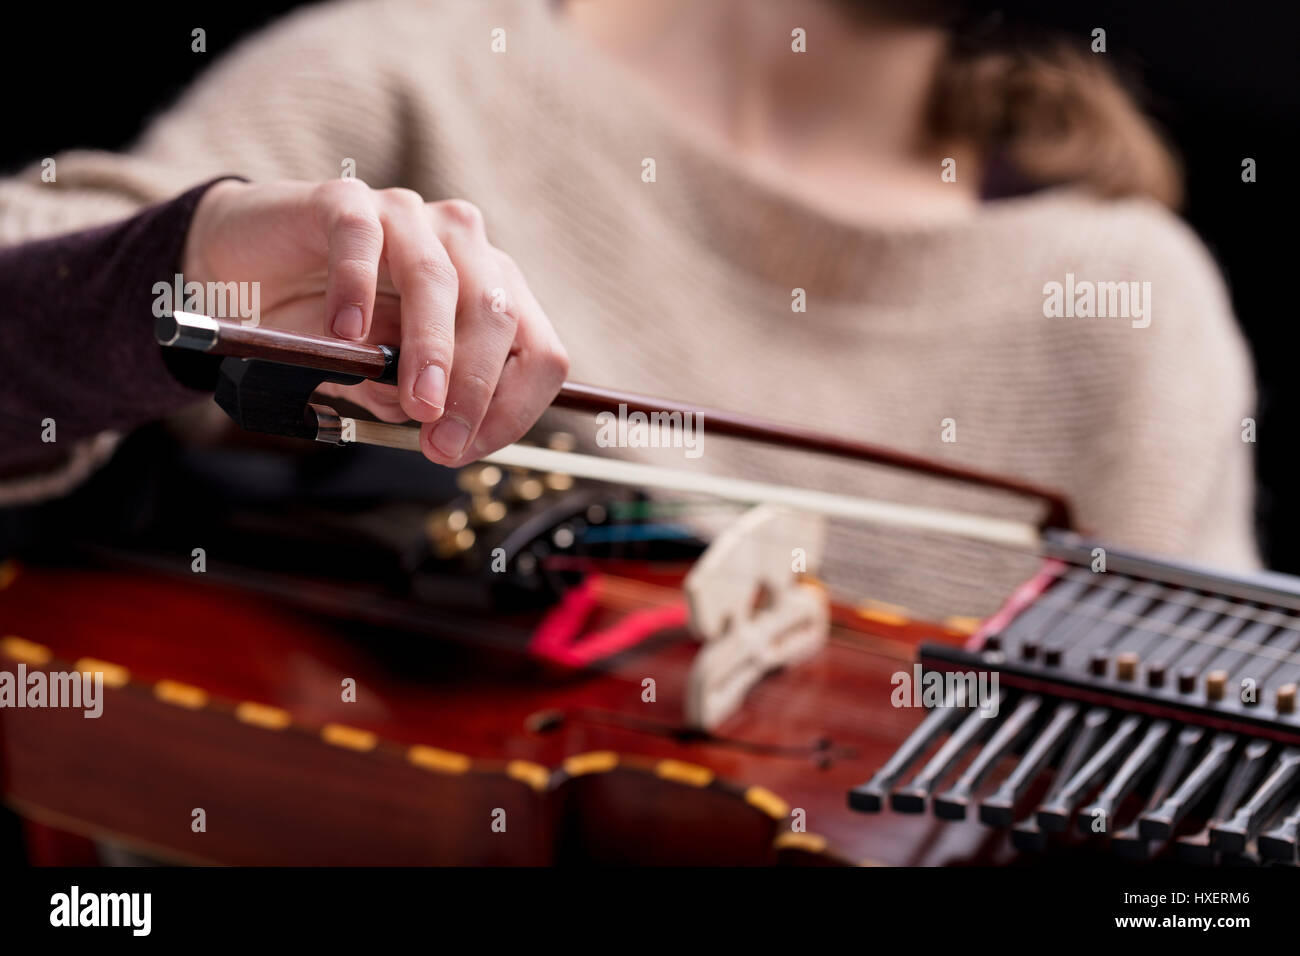 woman playing an ancient medieval musical instrument, modern reconstruction of an antique nyckelharpa, often used in folk or baroque musical concerts  Stock Photo